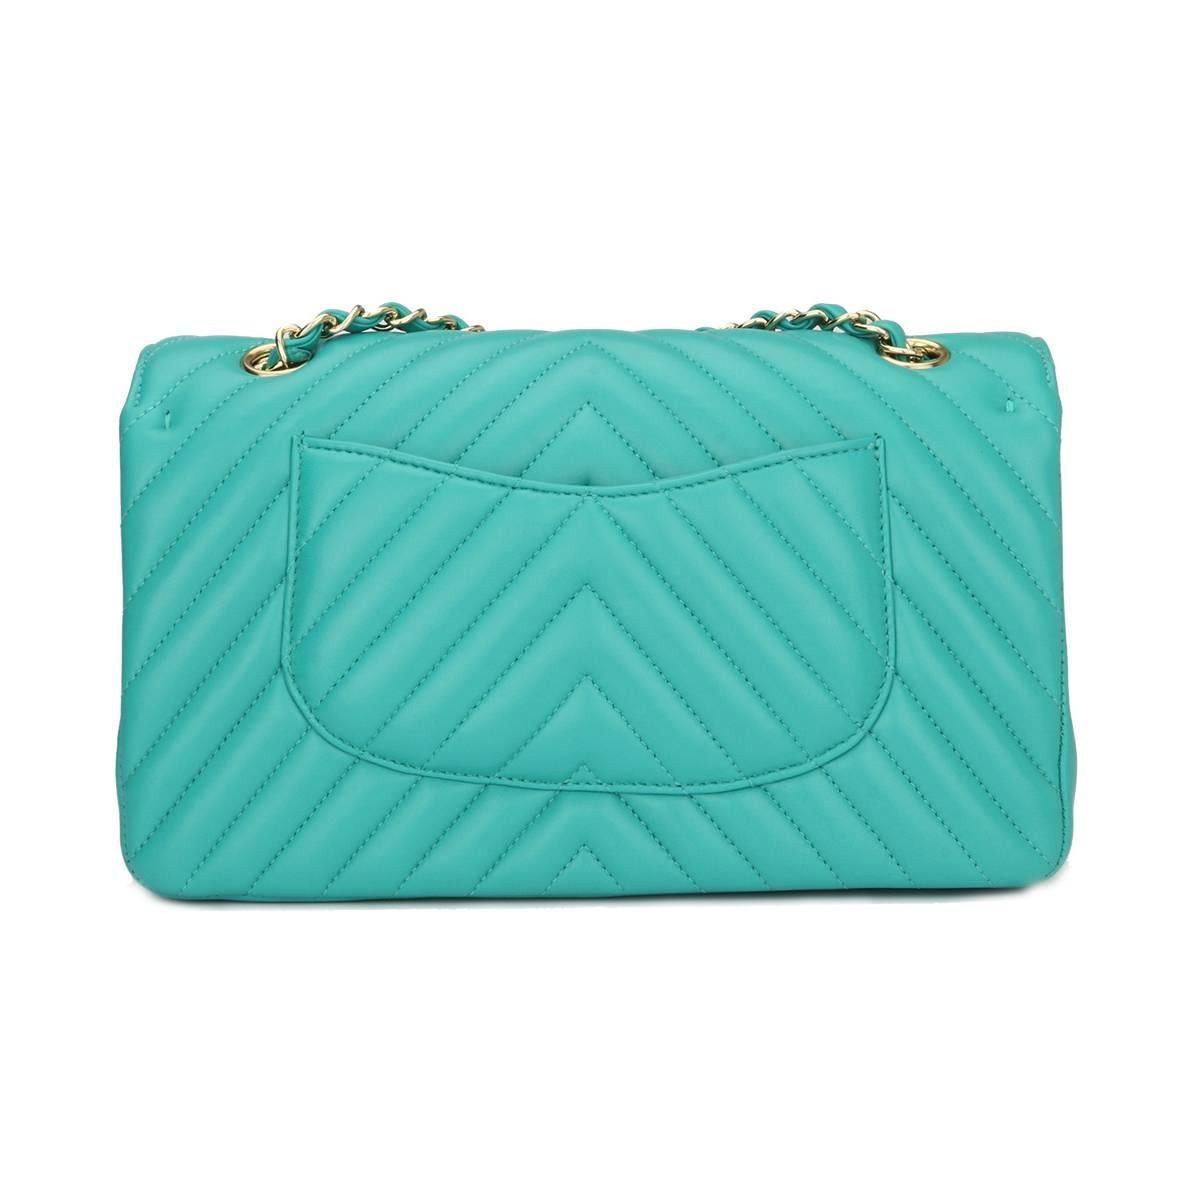 Authentic CHANEL Classic Double Flap M/L Chevron Turquoise Lambskin with Champagne Gold Hardware 2017.

This stunning bag is still in a pristine-brand new condition and the leather still smells fresh as if new.

Exterior Condition: Pristine